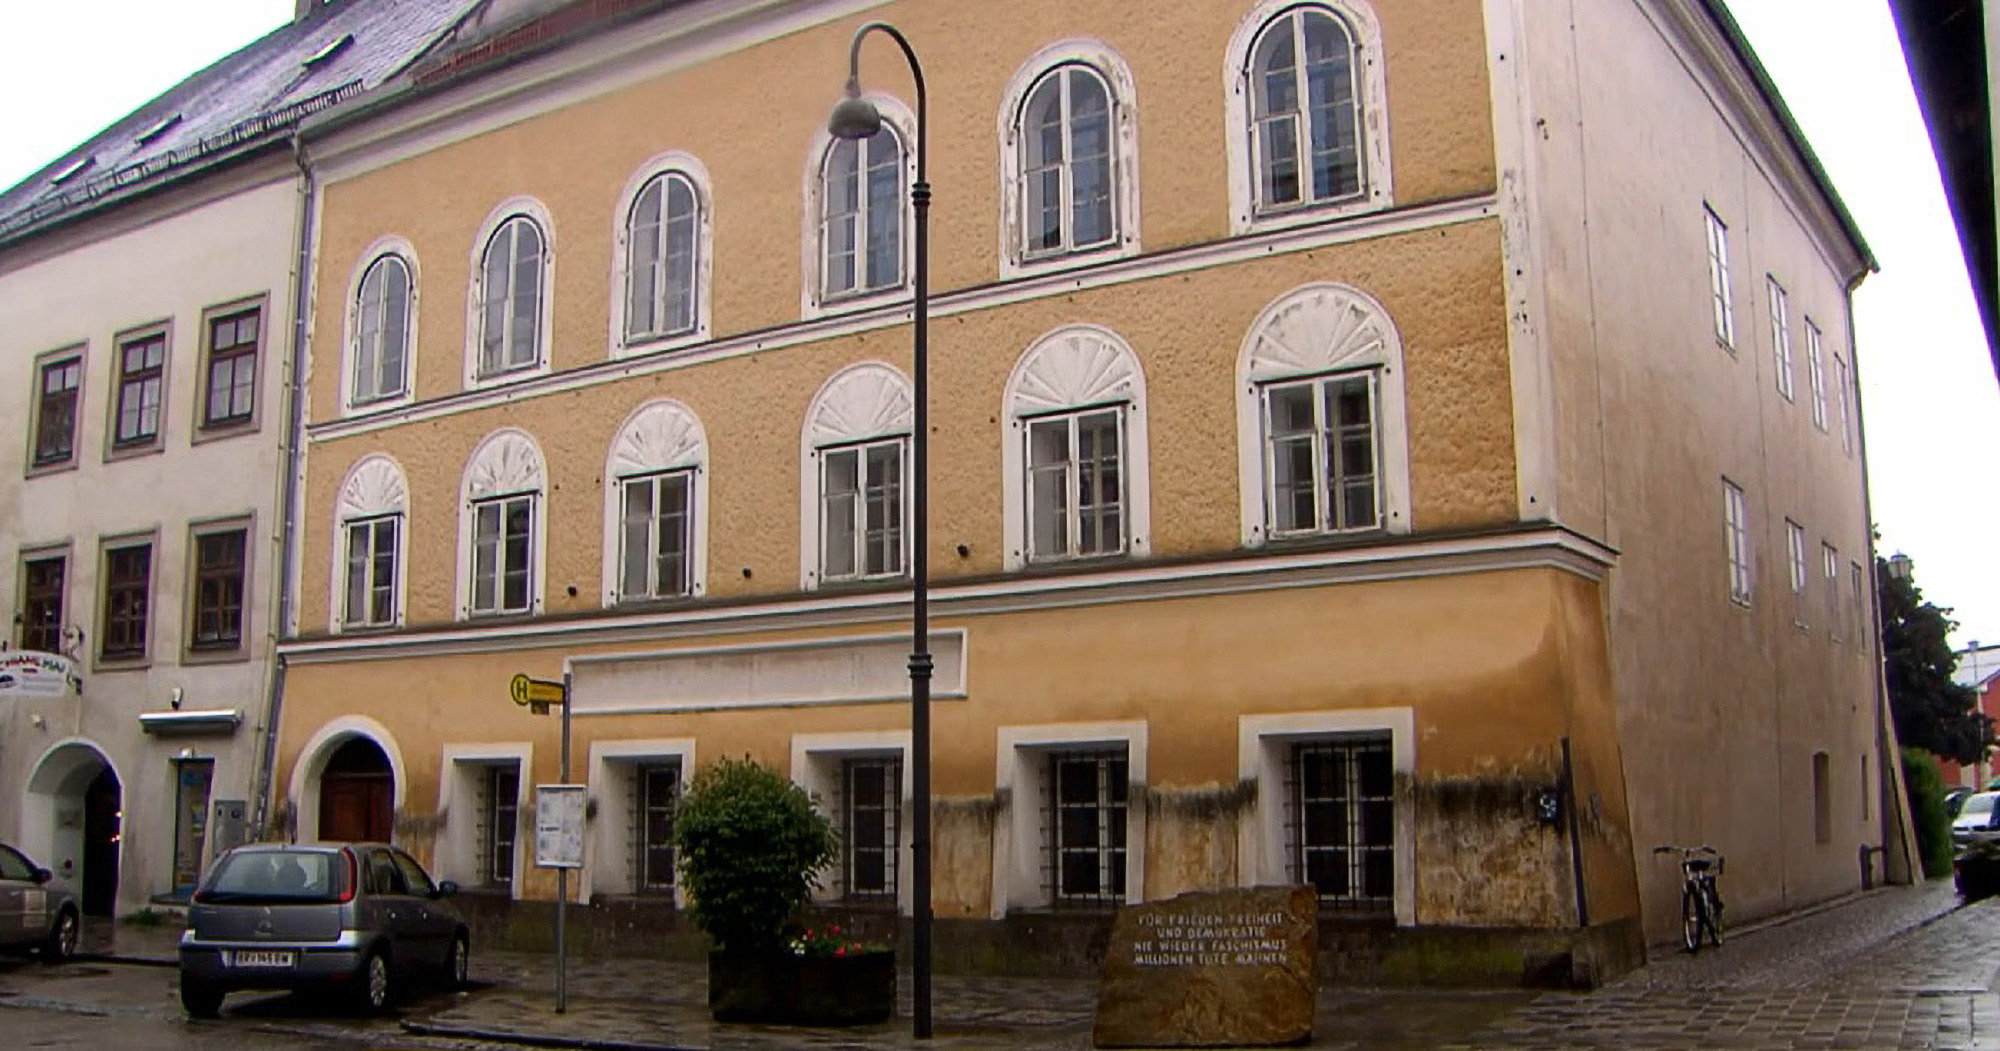 Hitler's birth house in Austria turned into human rights training center for police